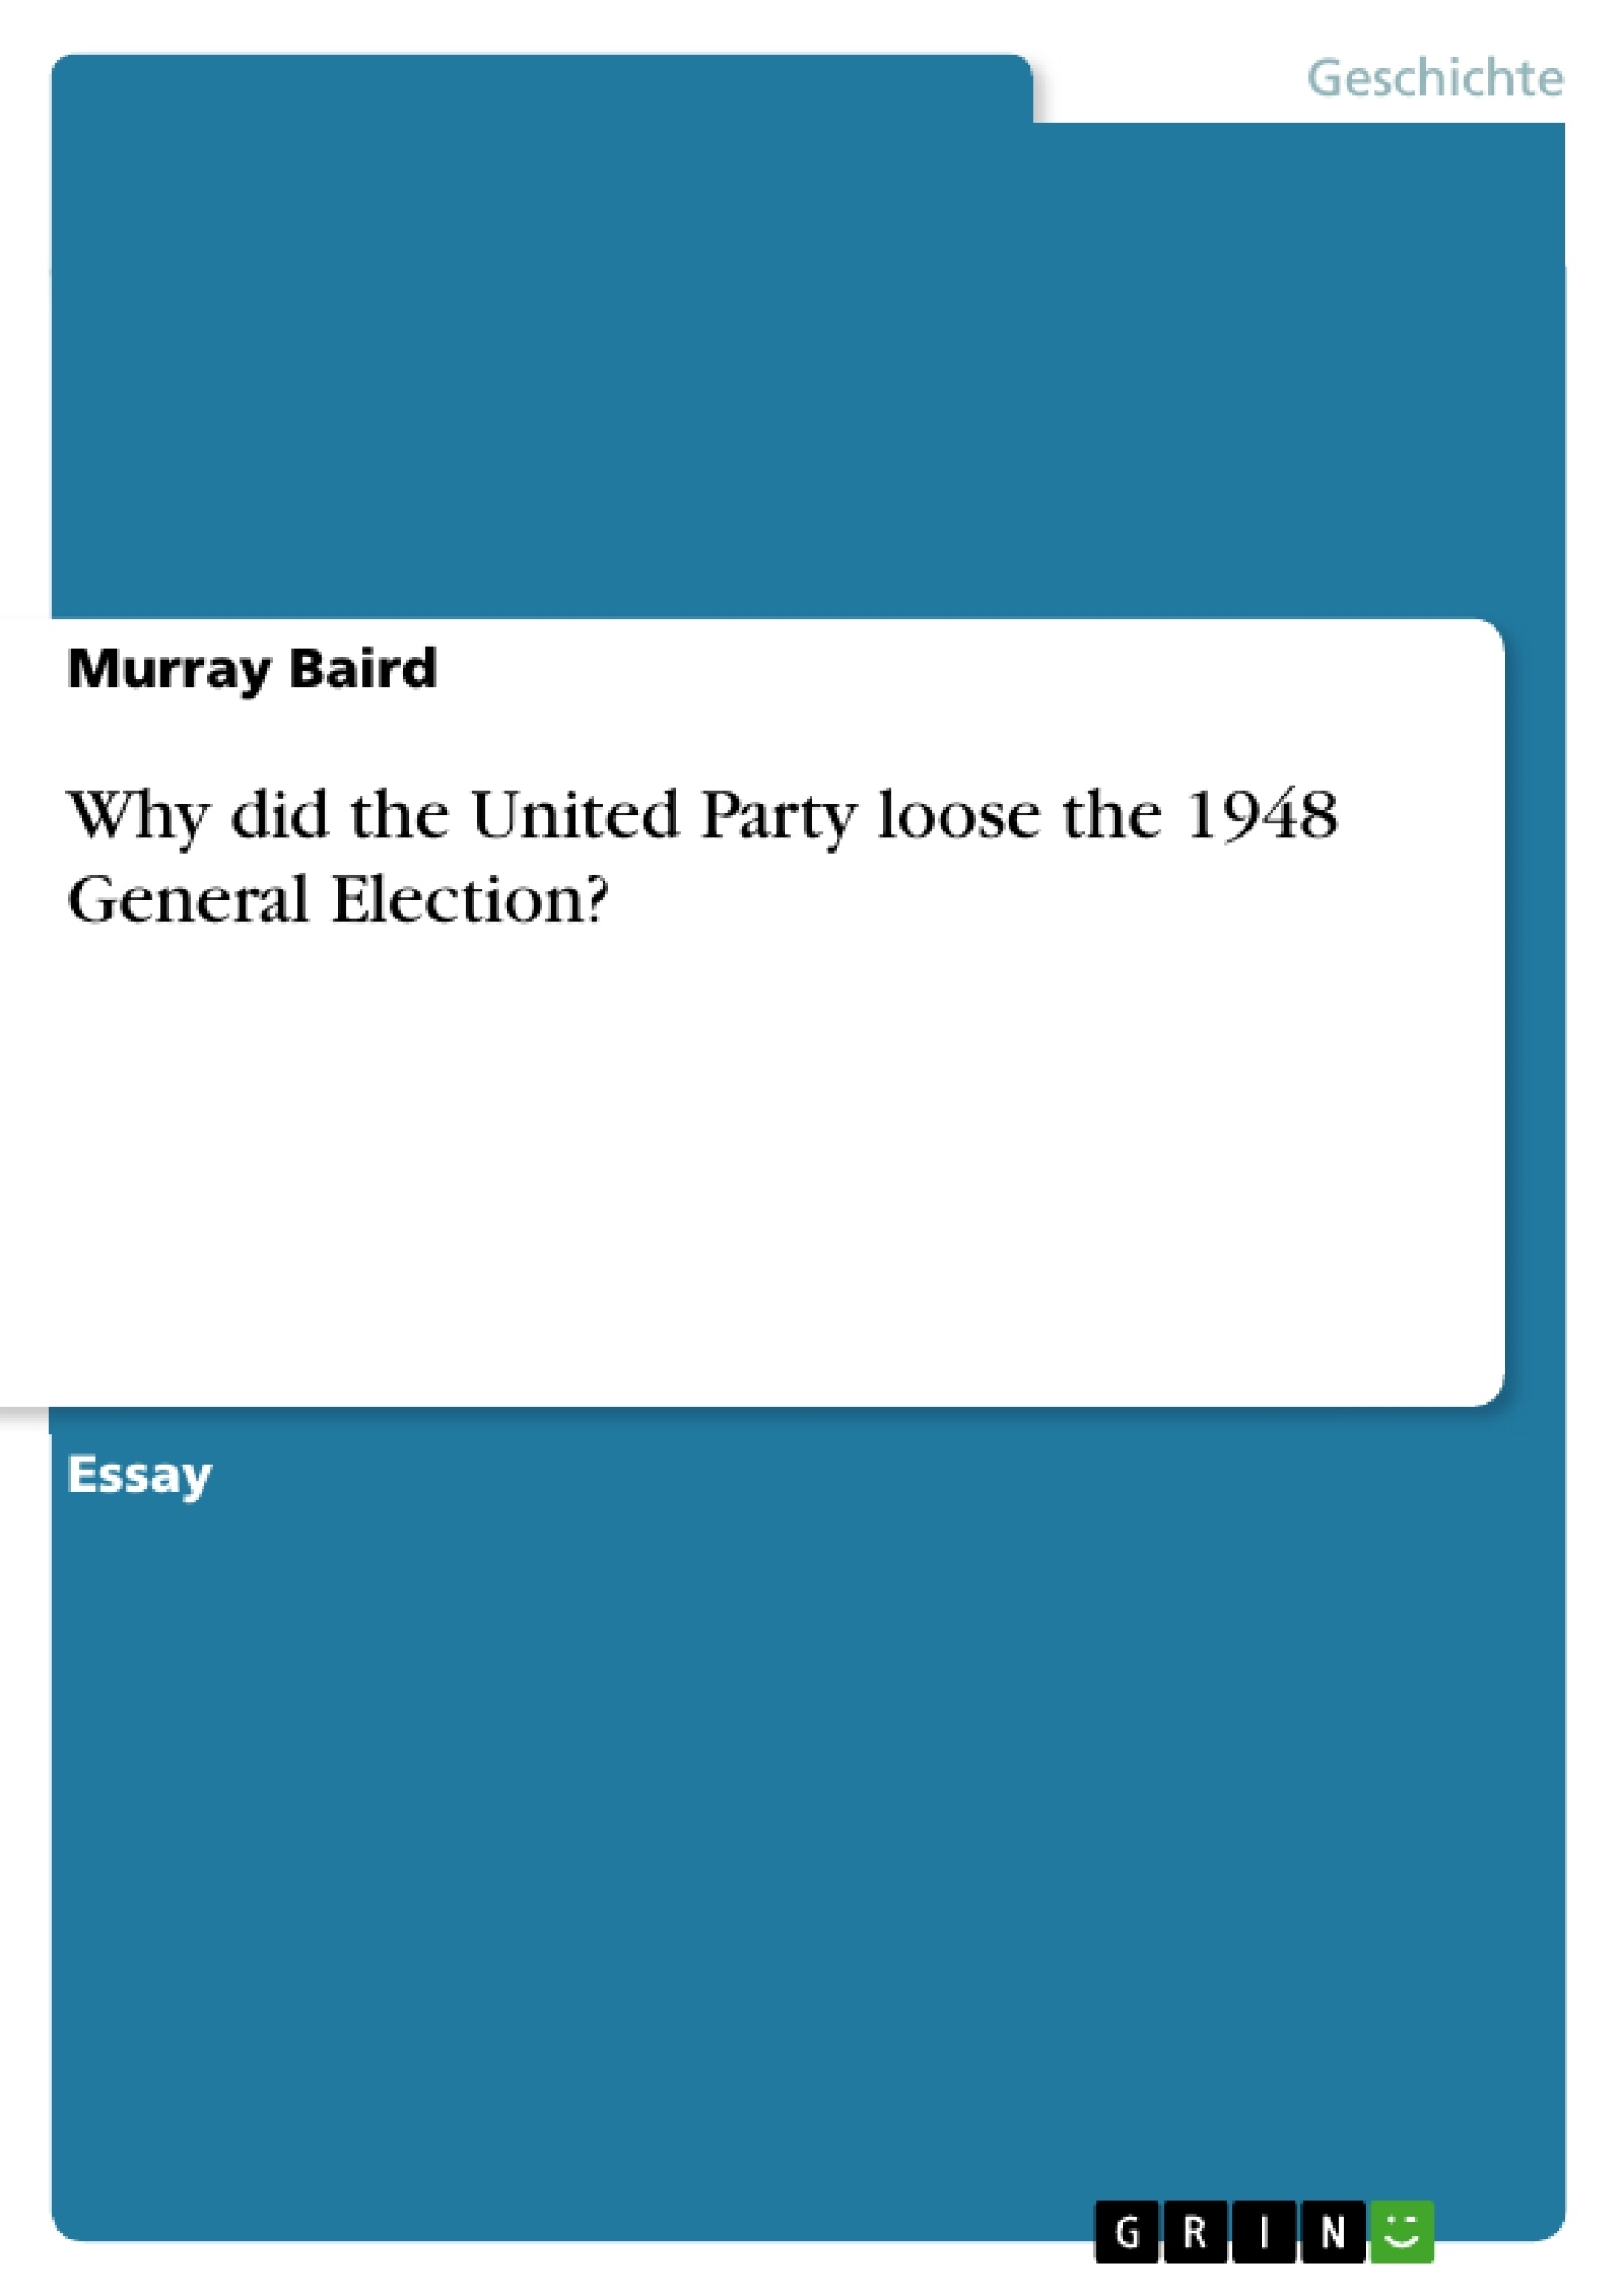 Título: Why did the United Party loose the 1948 General Election?